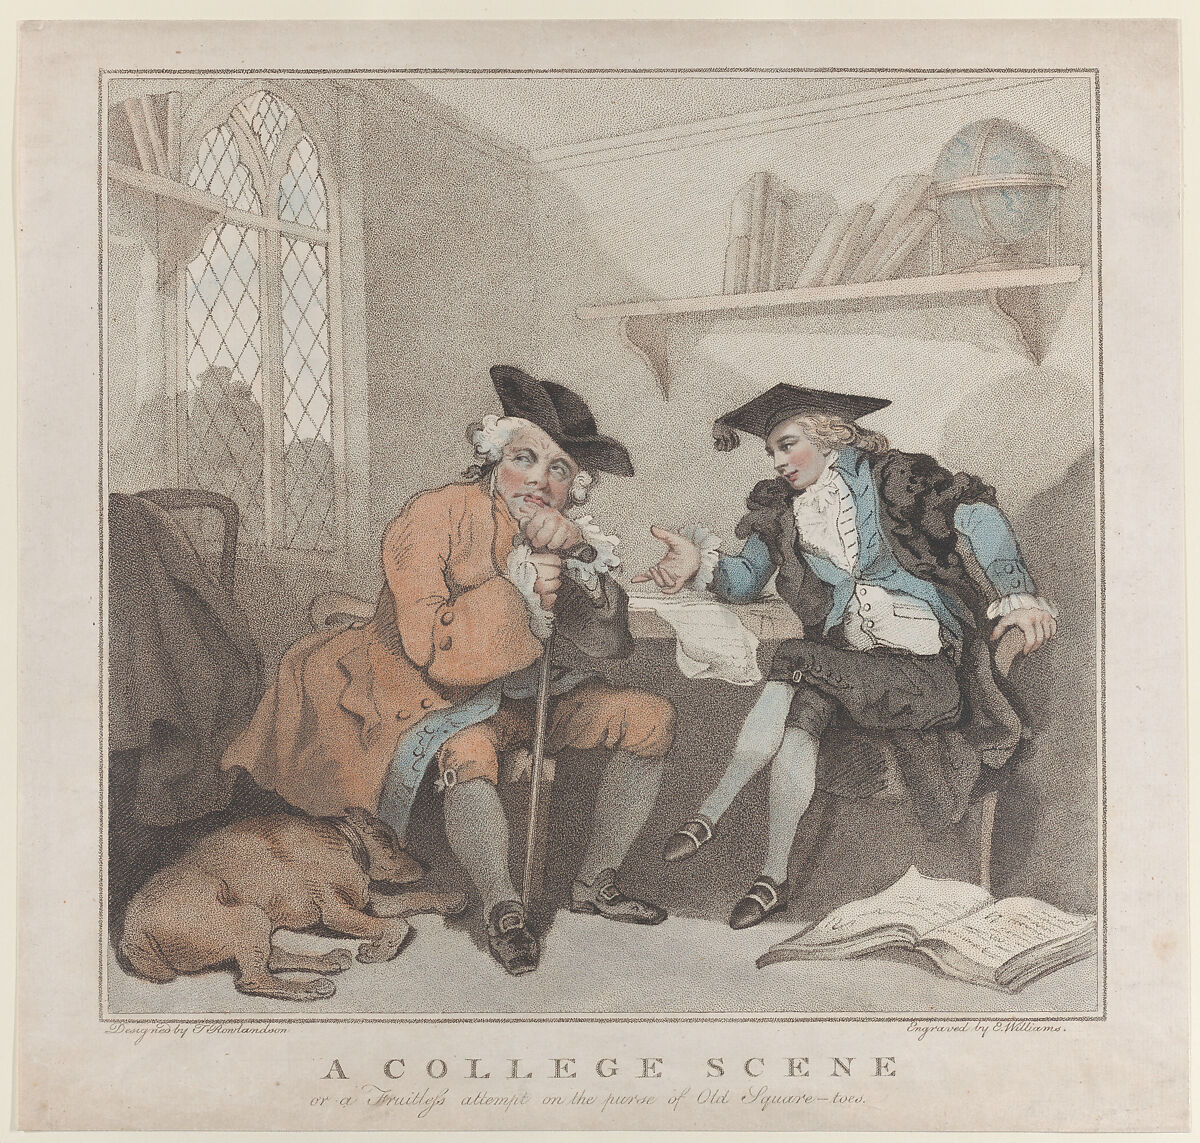 A College Scene, or a Fruitless Attempt on the Purse of Old Square-toes, Edward Williams the Elder (British, active London, ca. 1786), Hand-colored etching with stipple and softground 